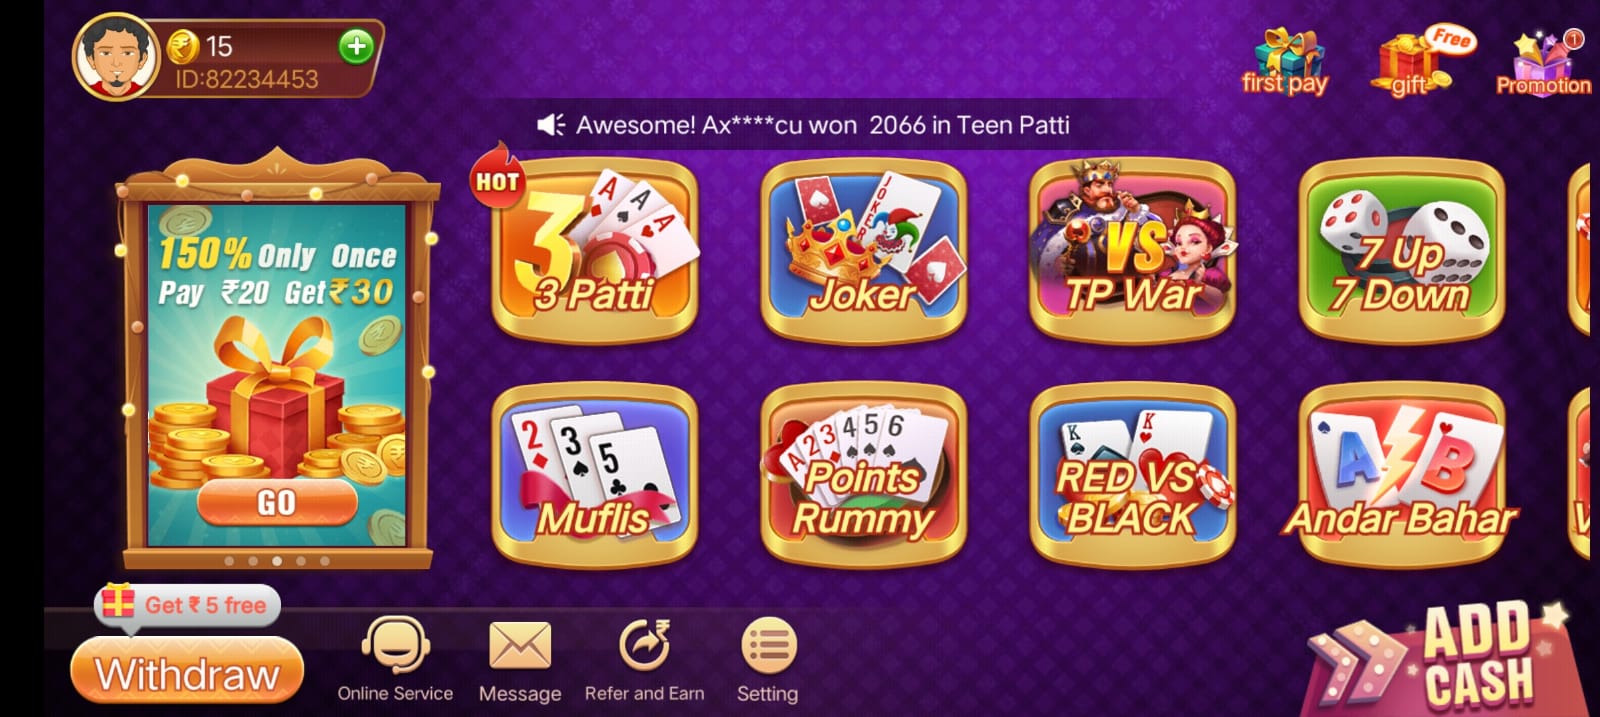 Available Games On Teen Patti Tess App